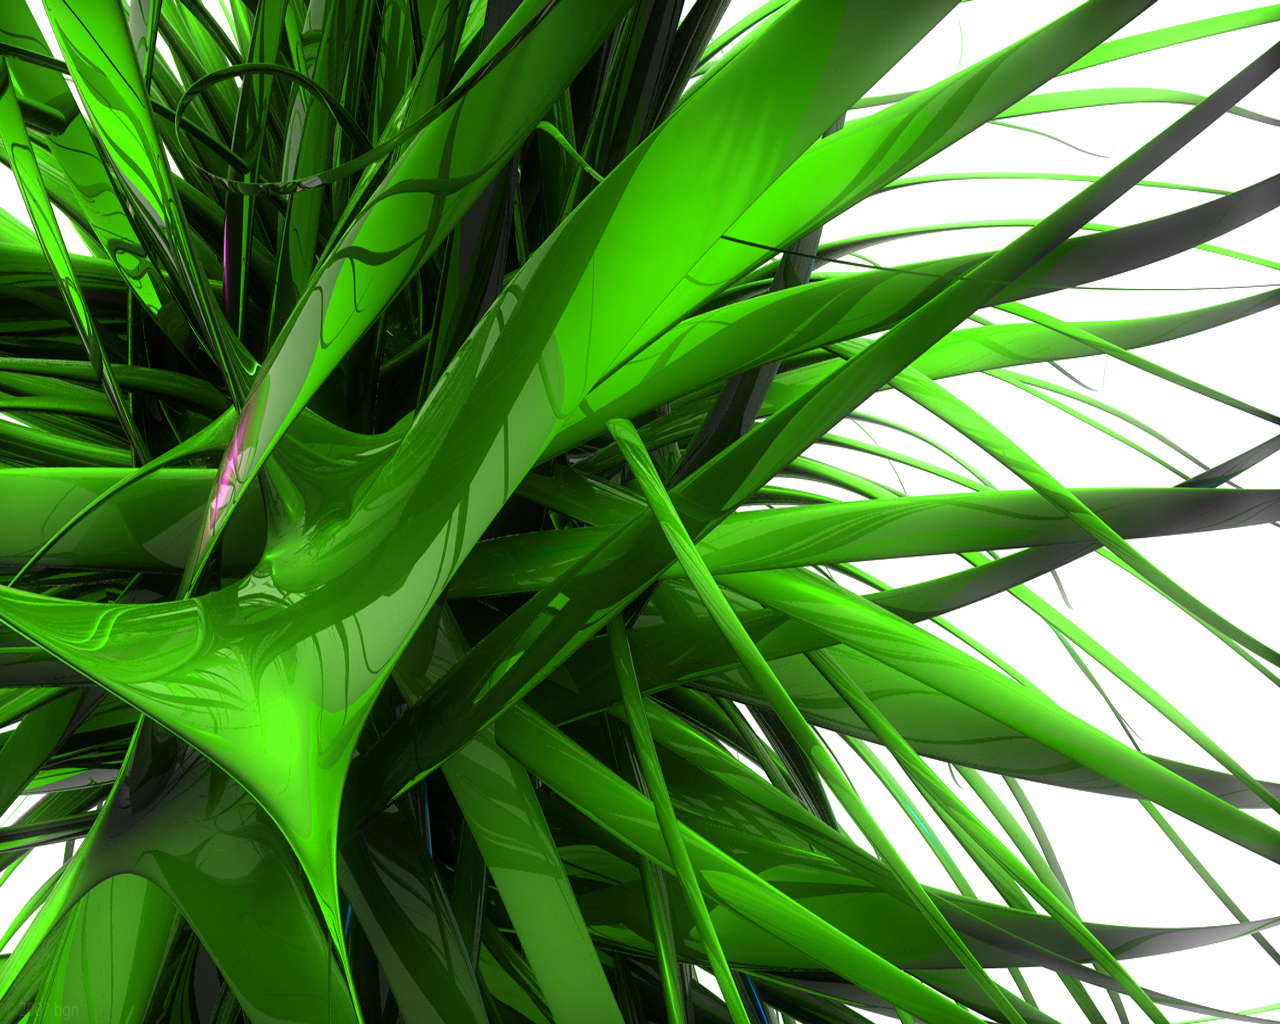 3d, green, abstract, cgi lock screen backgrounds